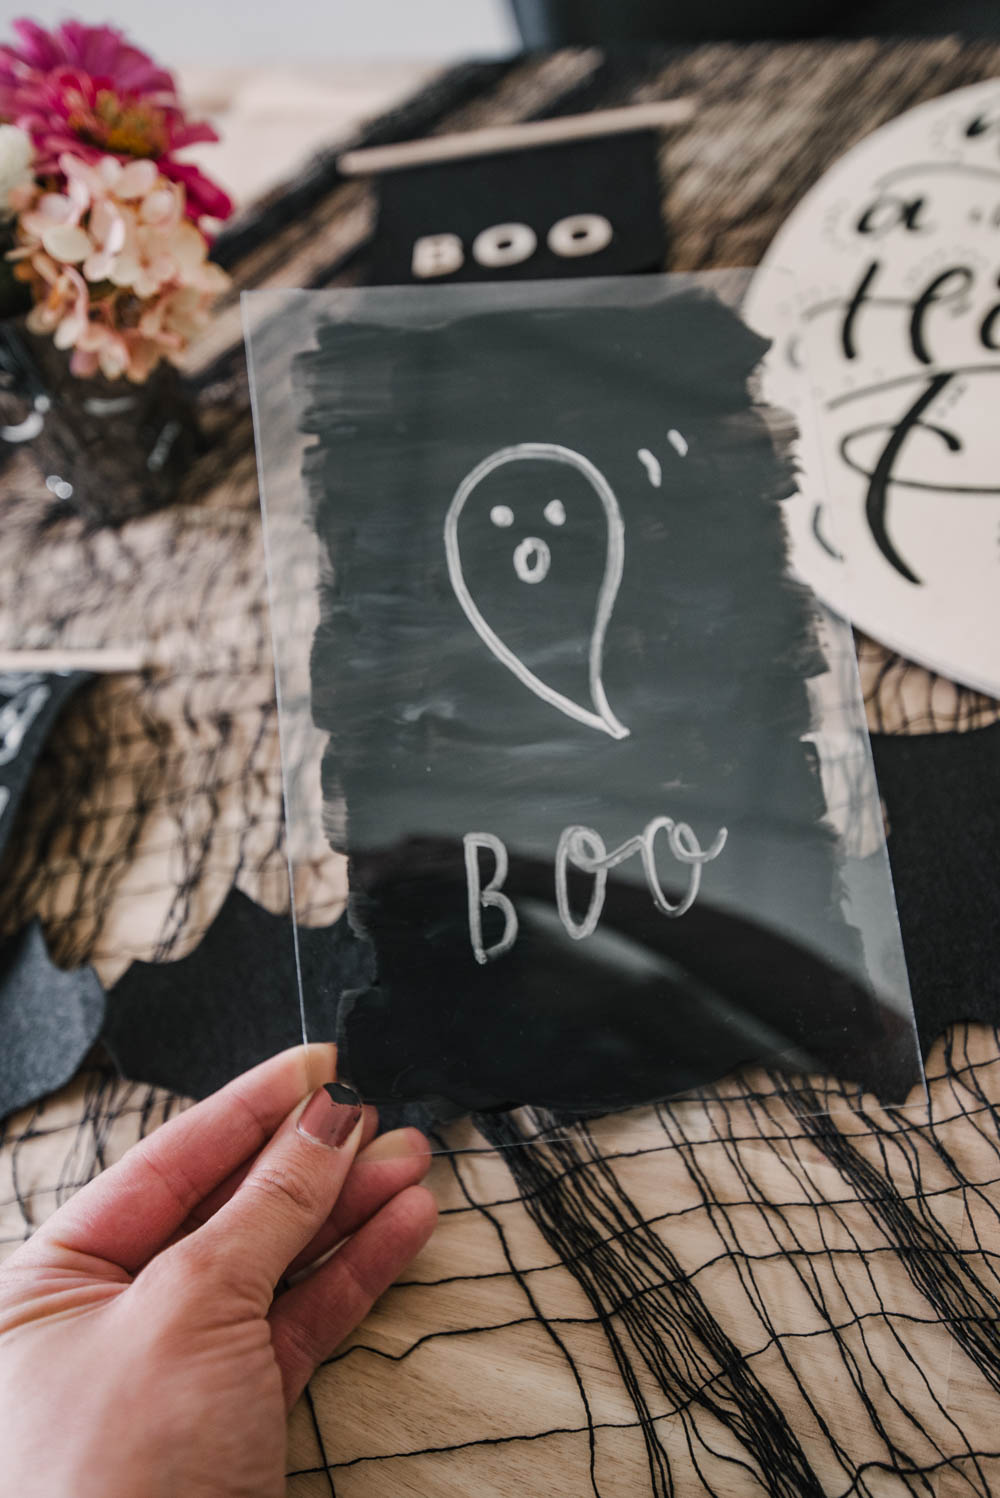 Boo! Acrylic sign from a dollar store picture frame